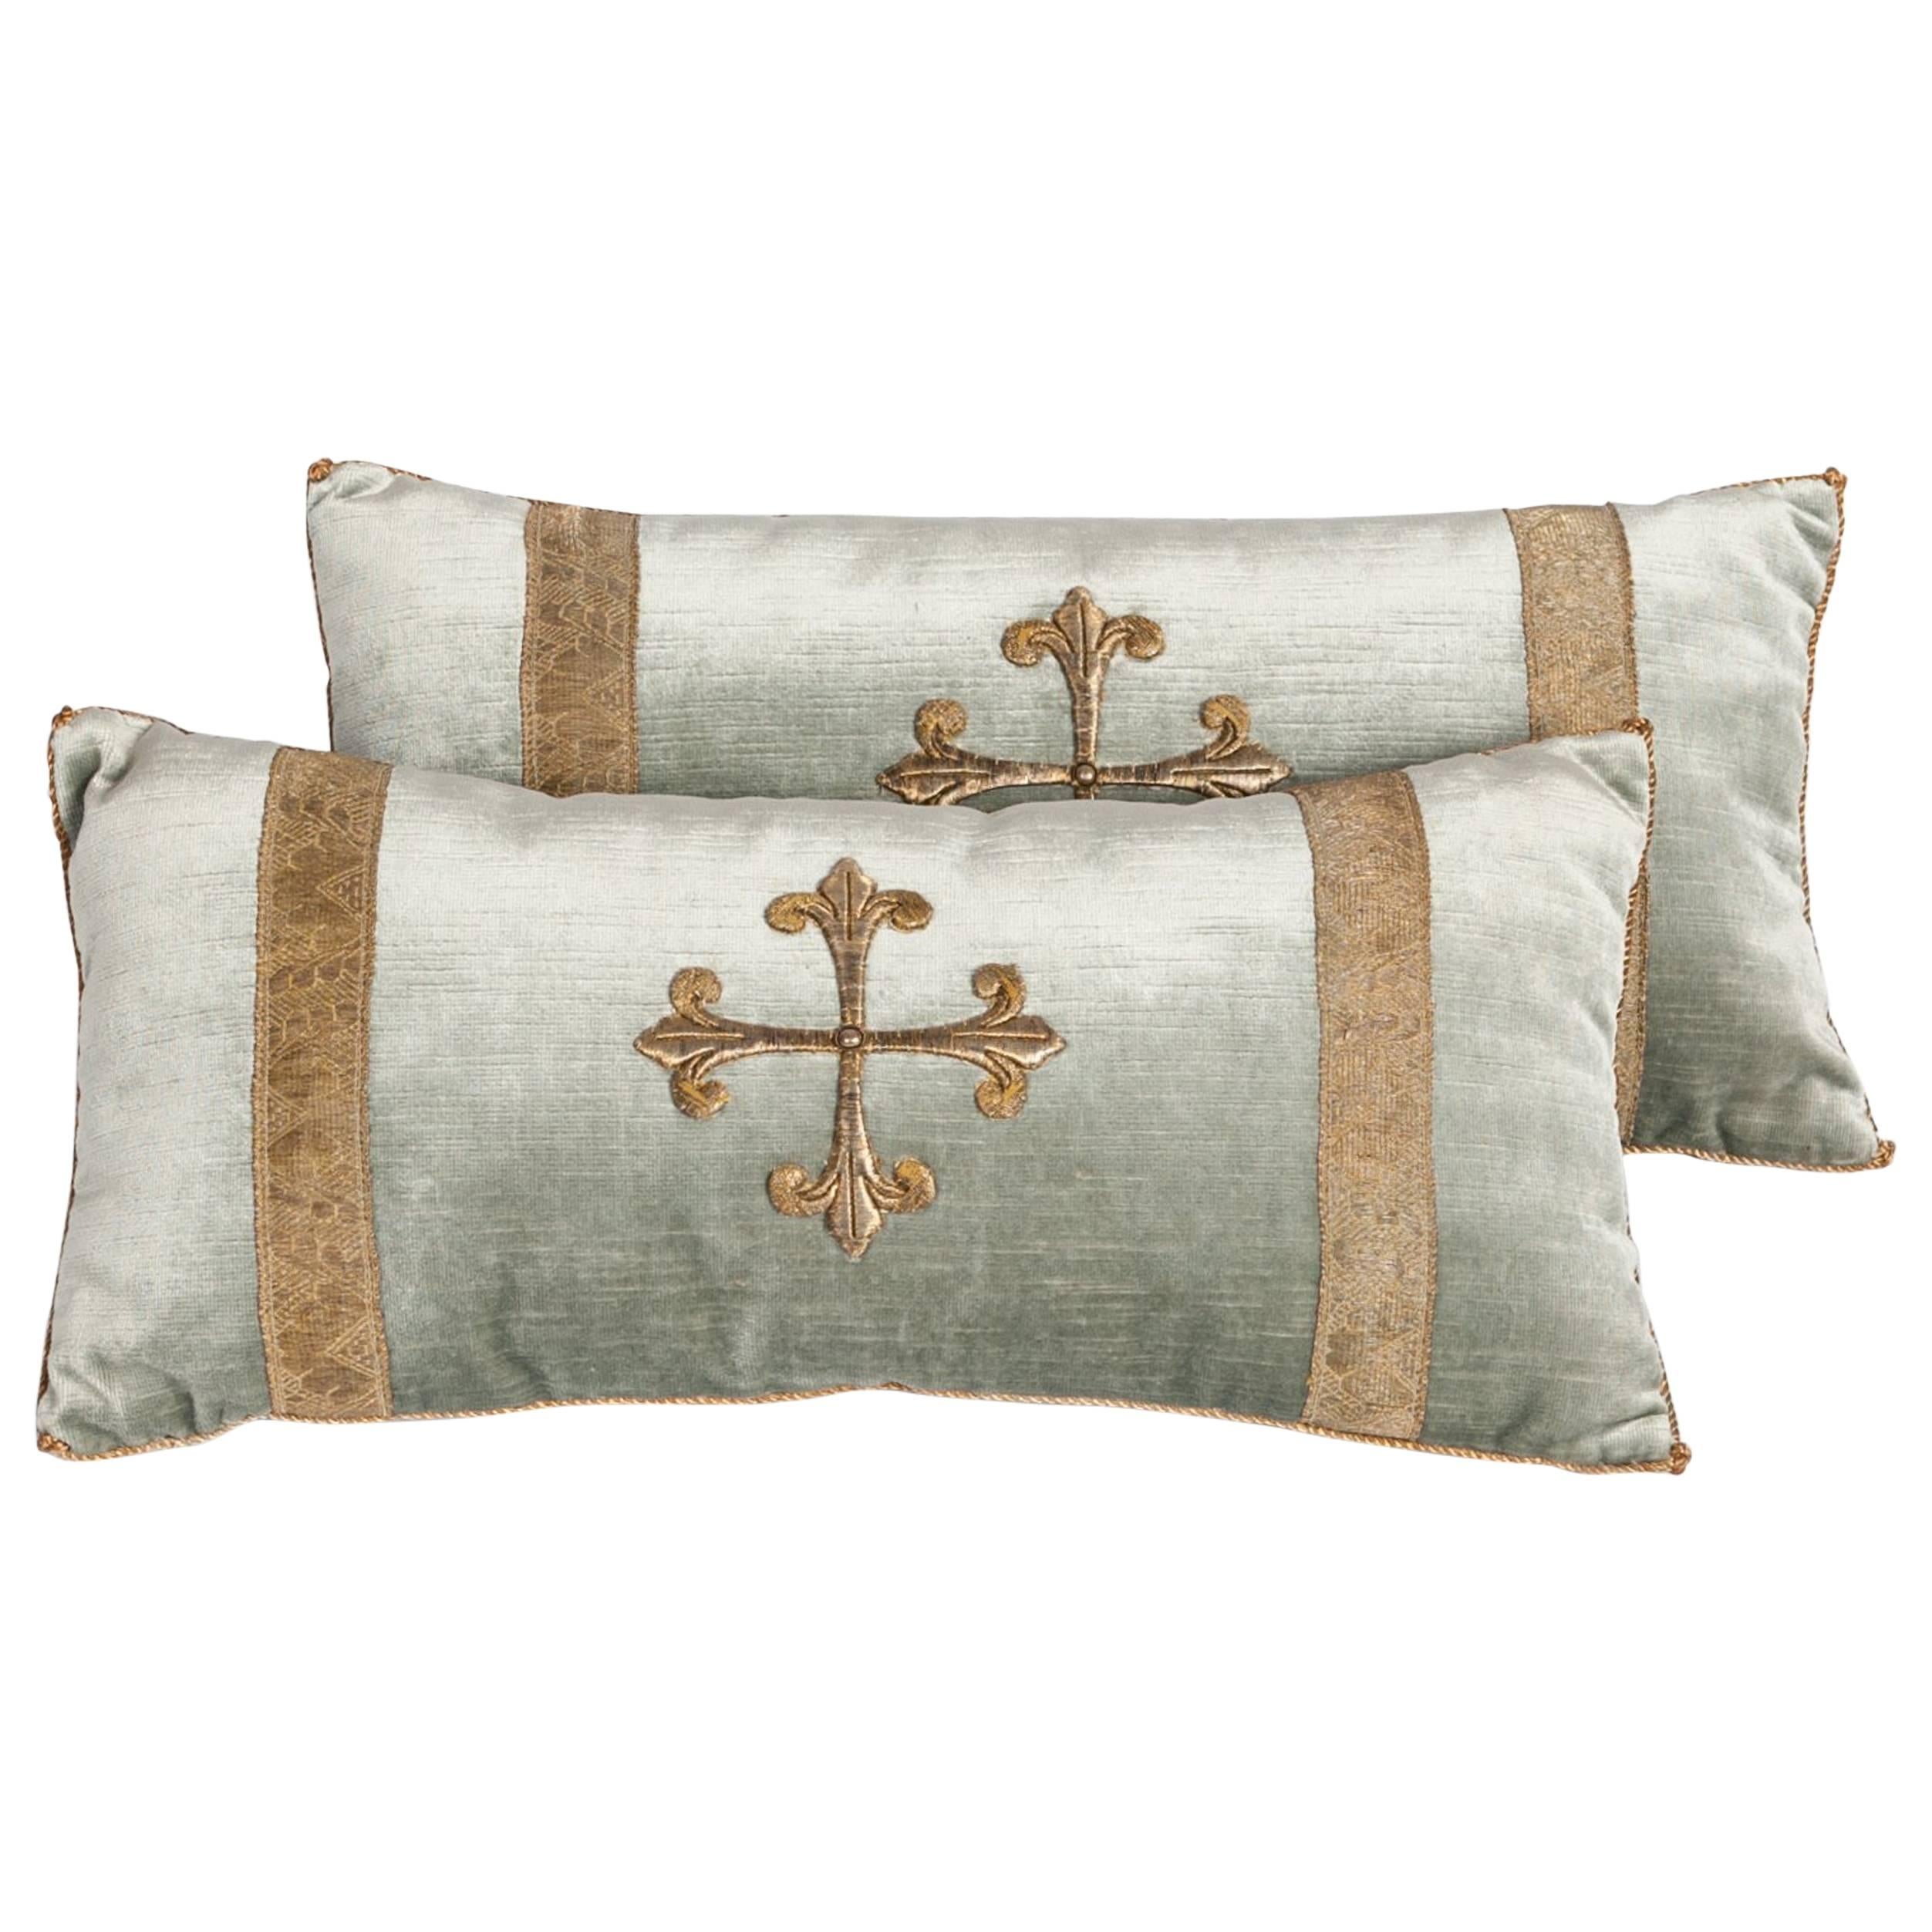 Pair of Pastel Green Colored Velvet Pillows with Antique Metallic Embroidery 